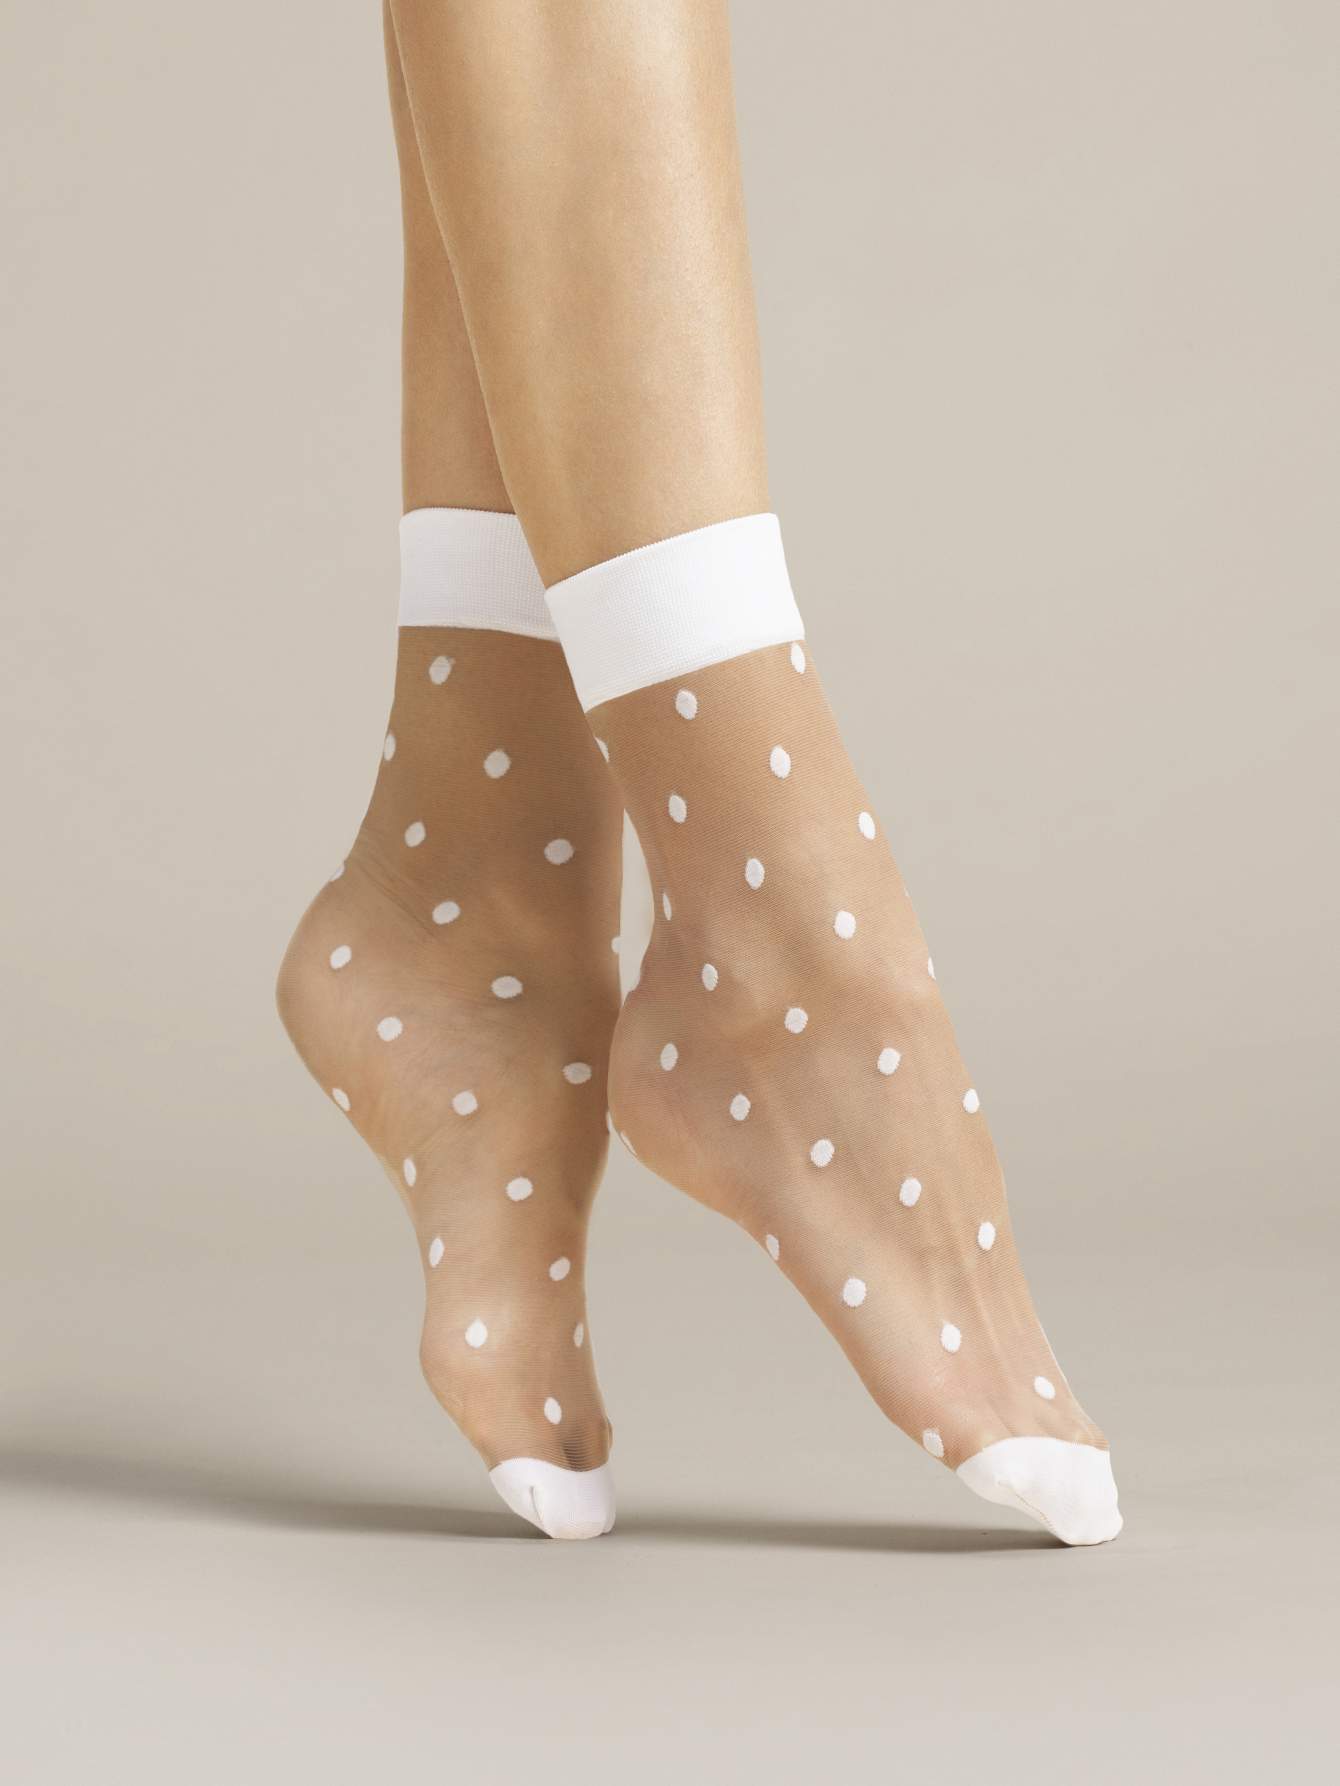 Fiore Papavero Sock - Sheer nude fashion ankle socks with woven white spot pattern and white cuff and toe.